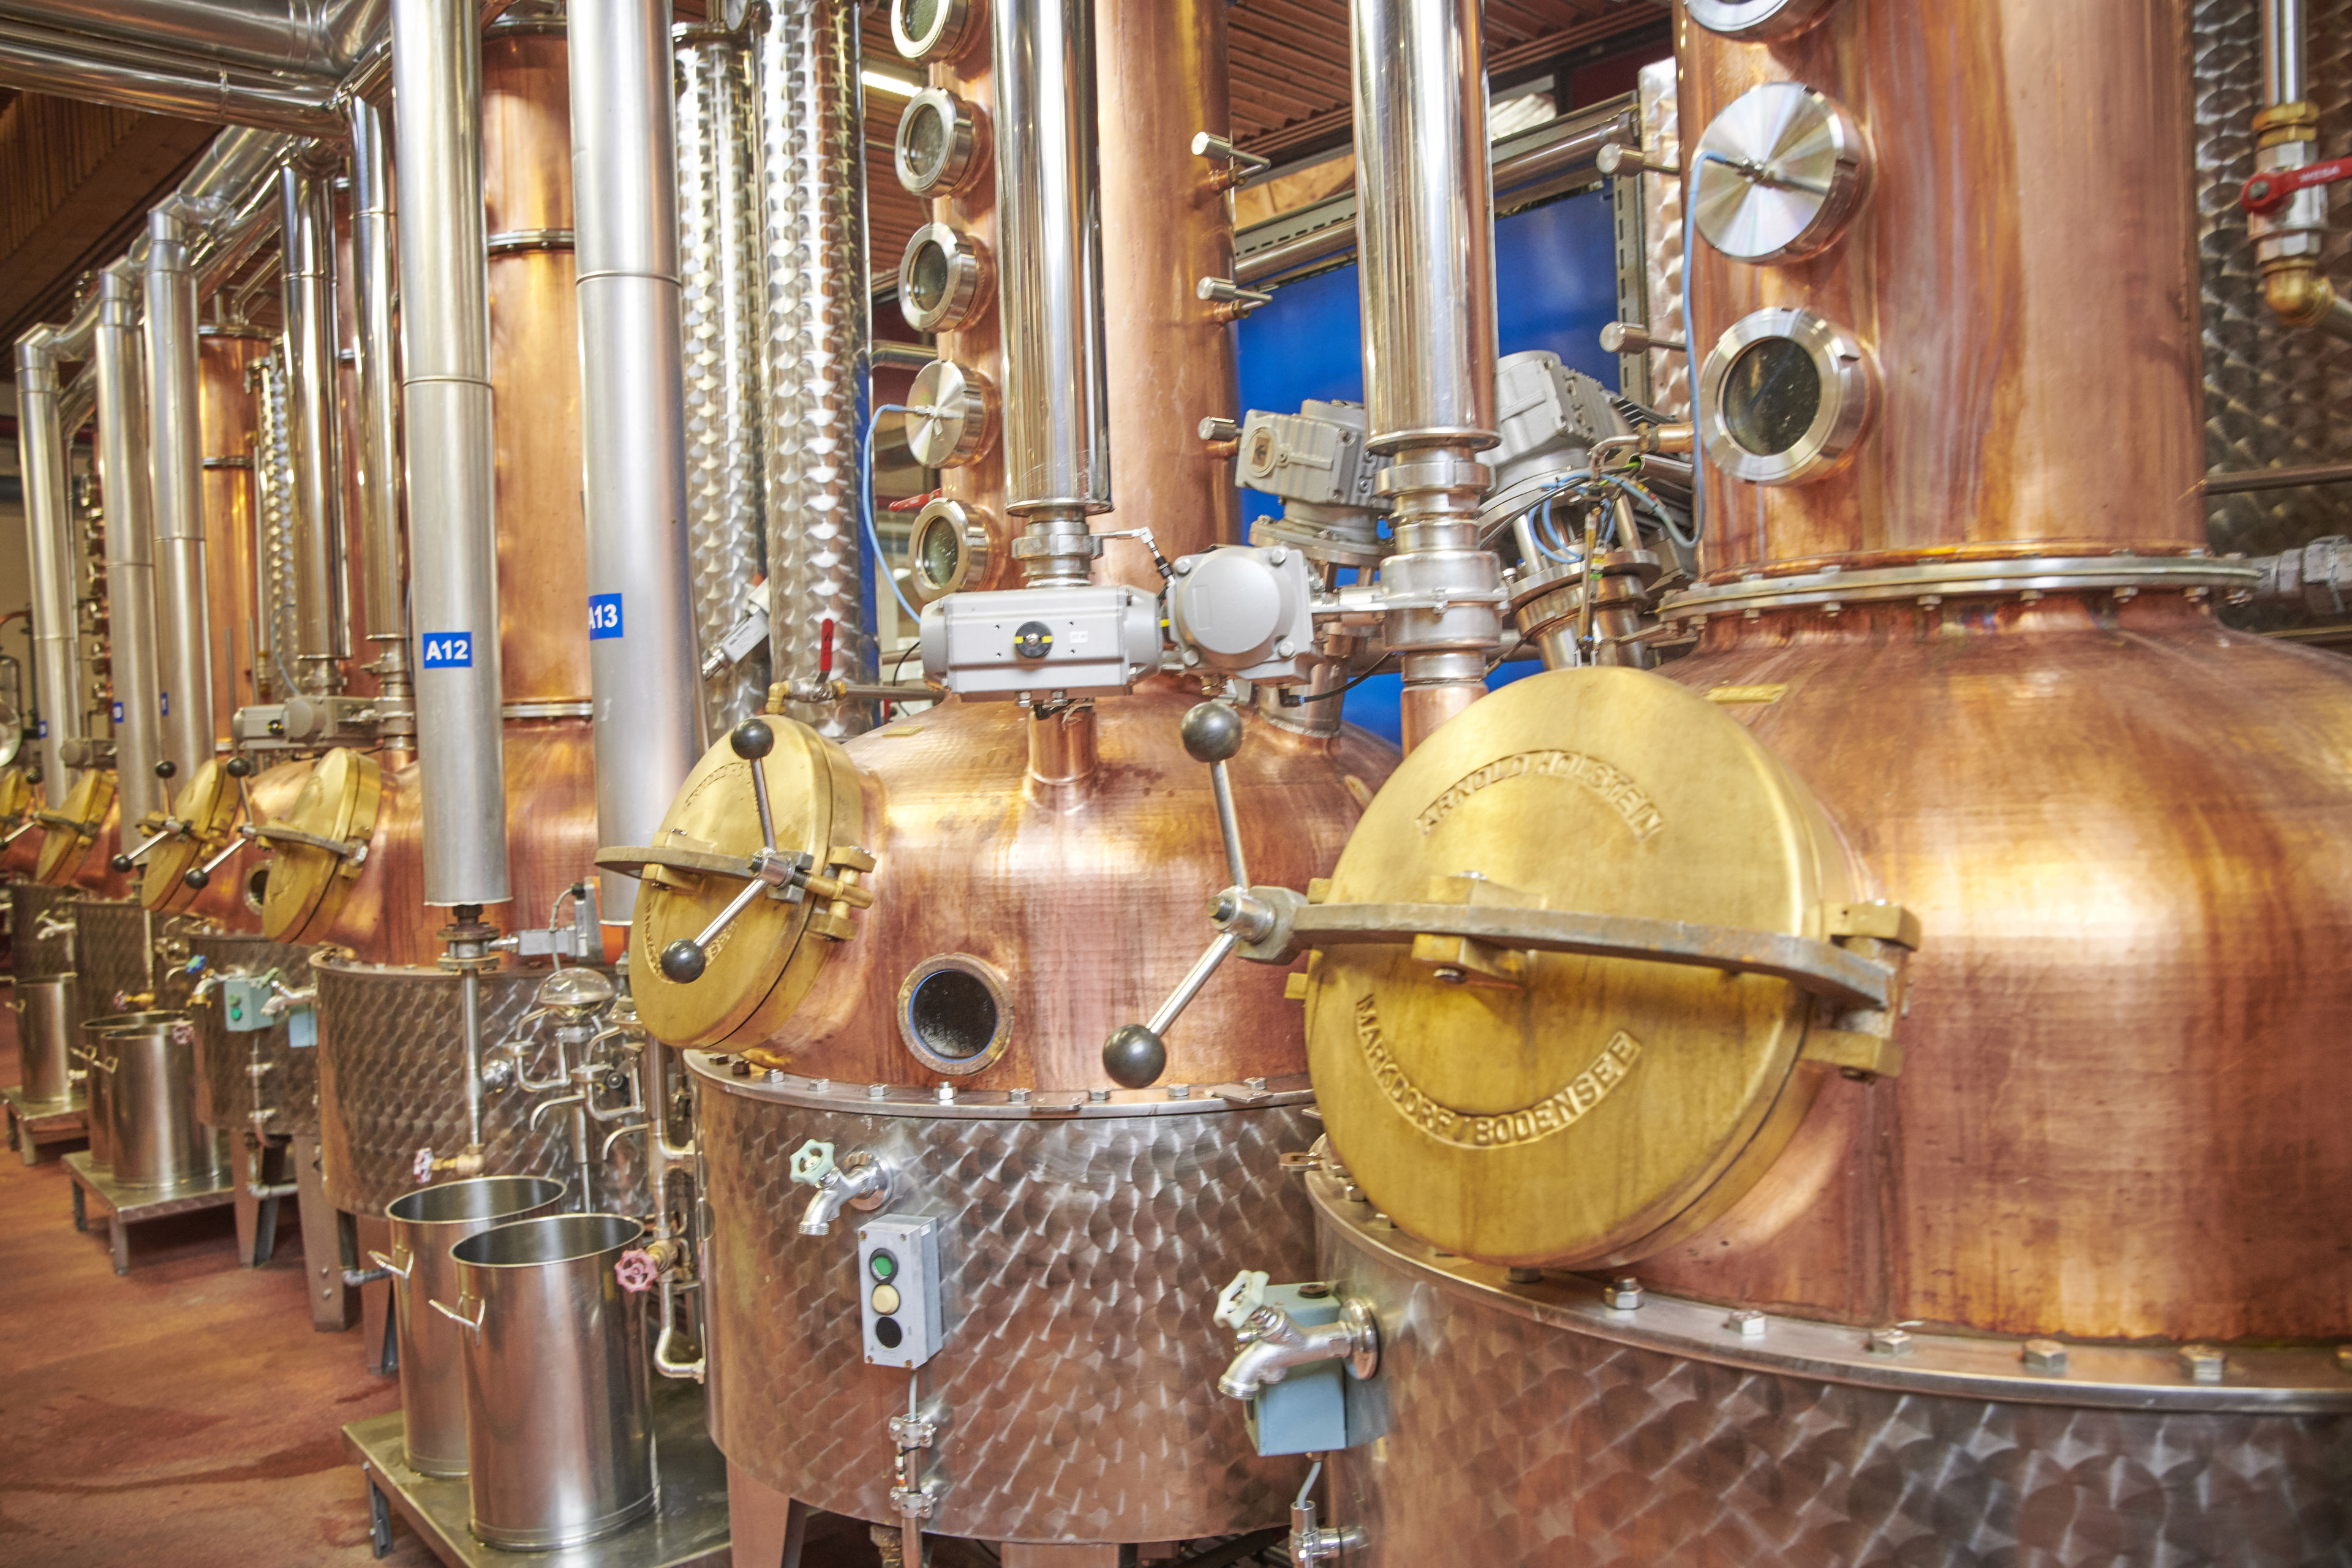 In these copper kettles the precious Eaux de Vie from the mash of fruits are distilled.